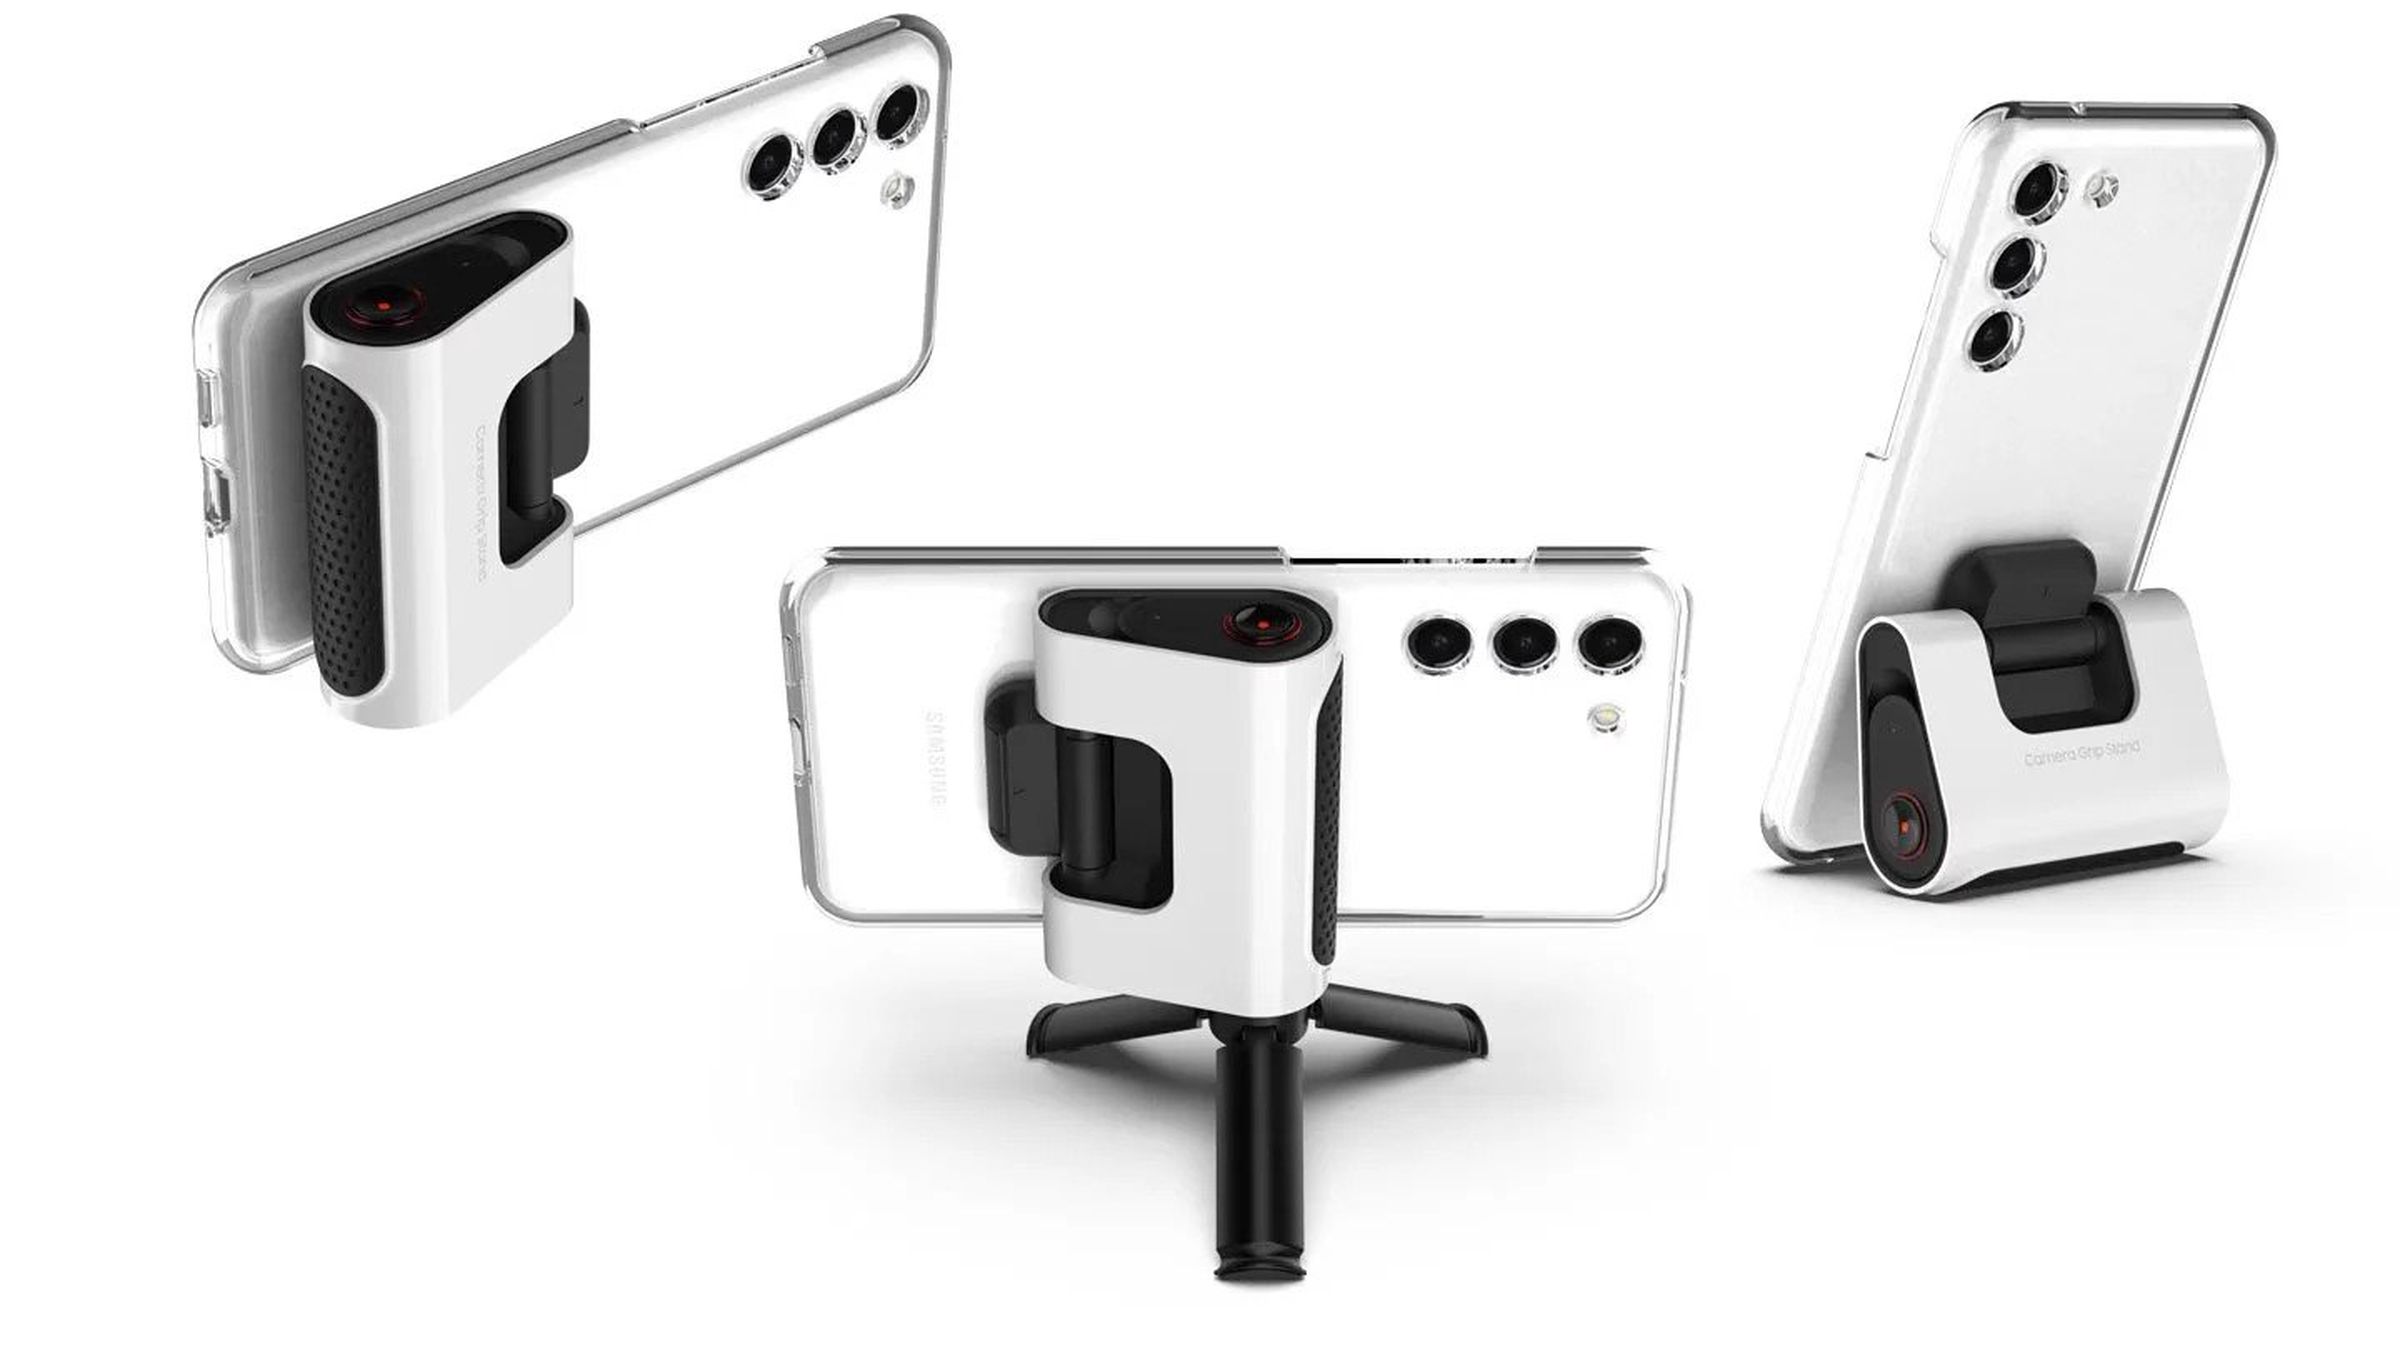 Product shots of the Samsung Camera Grip stand for the Galaxy S23 series.